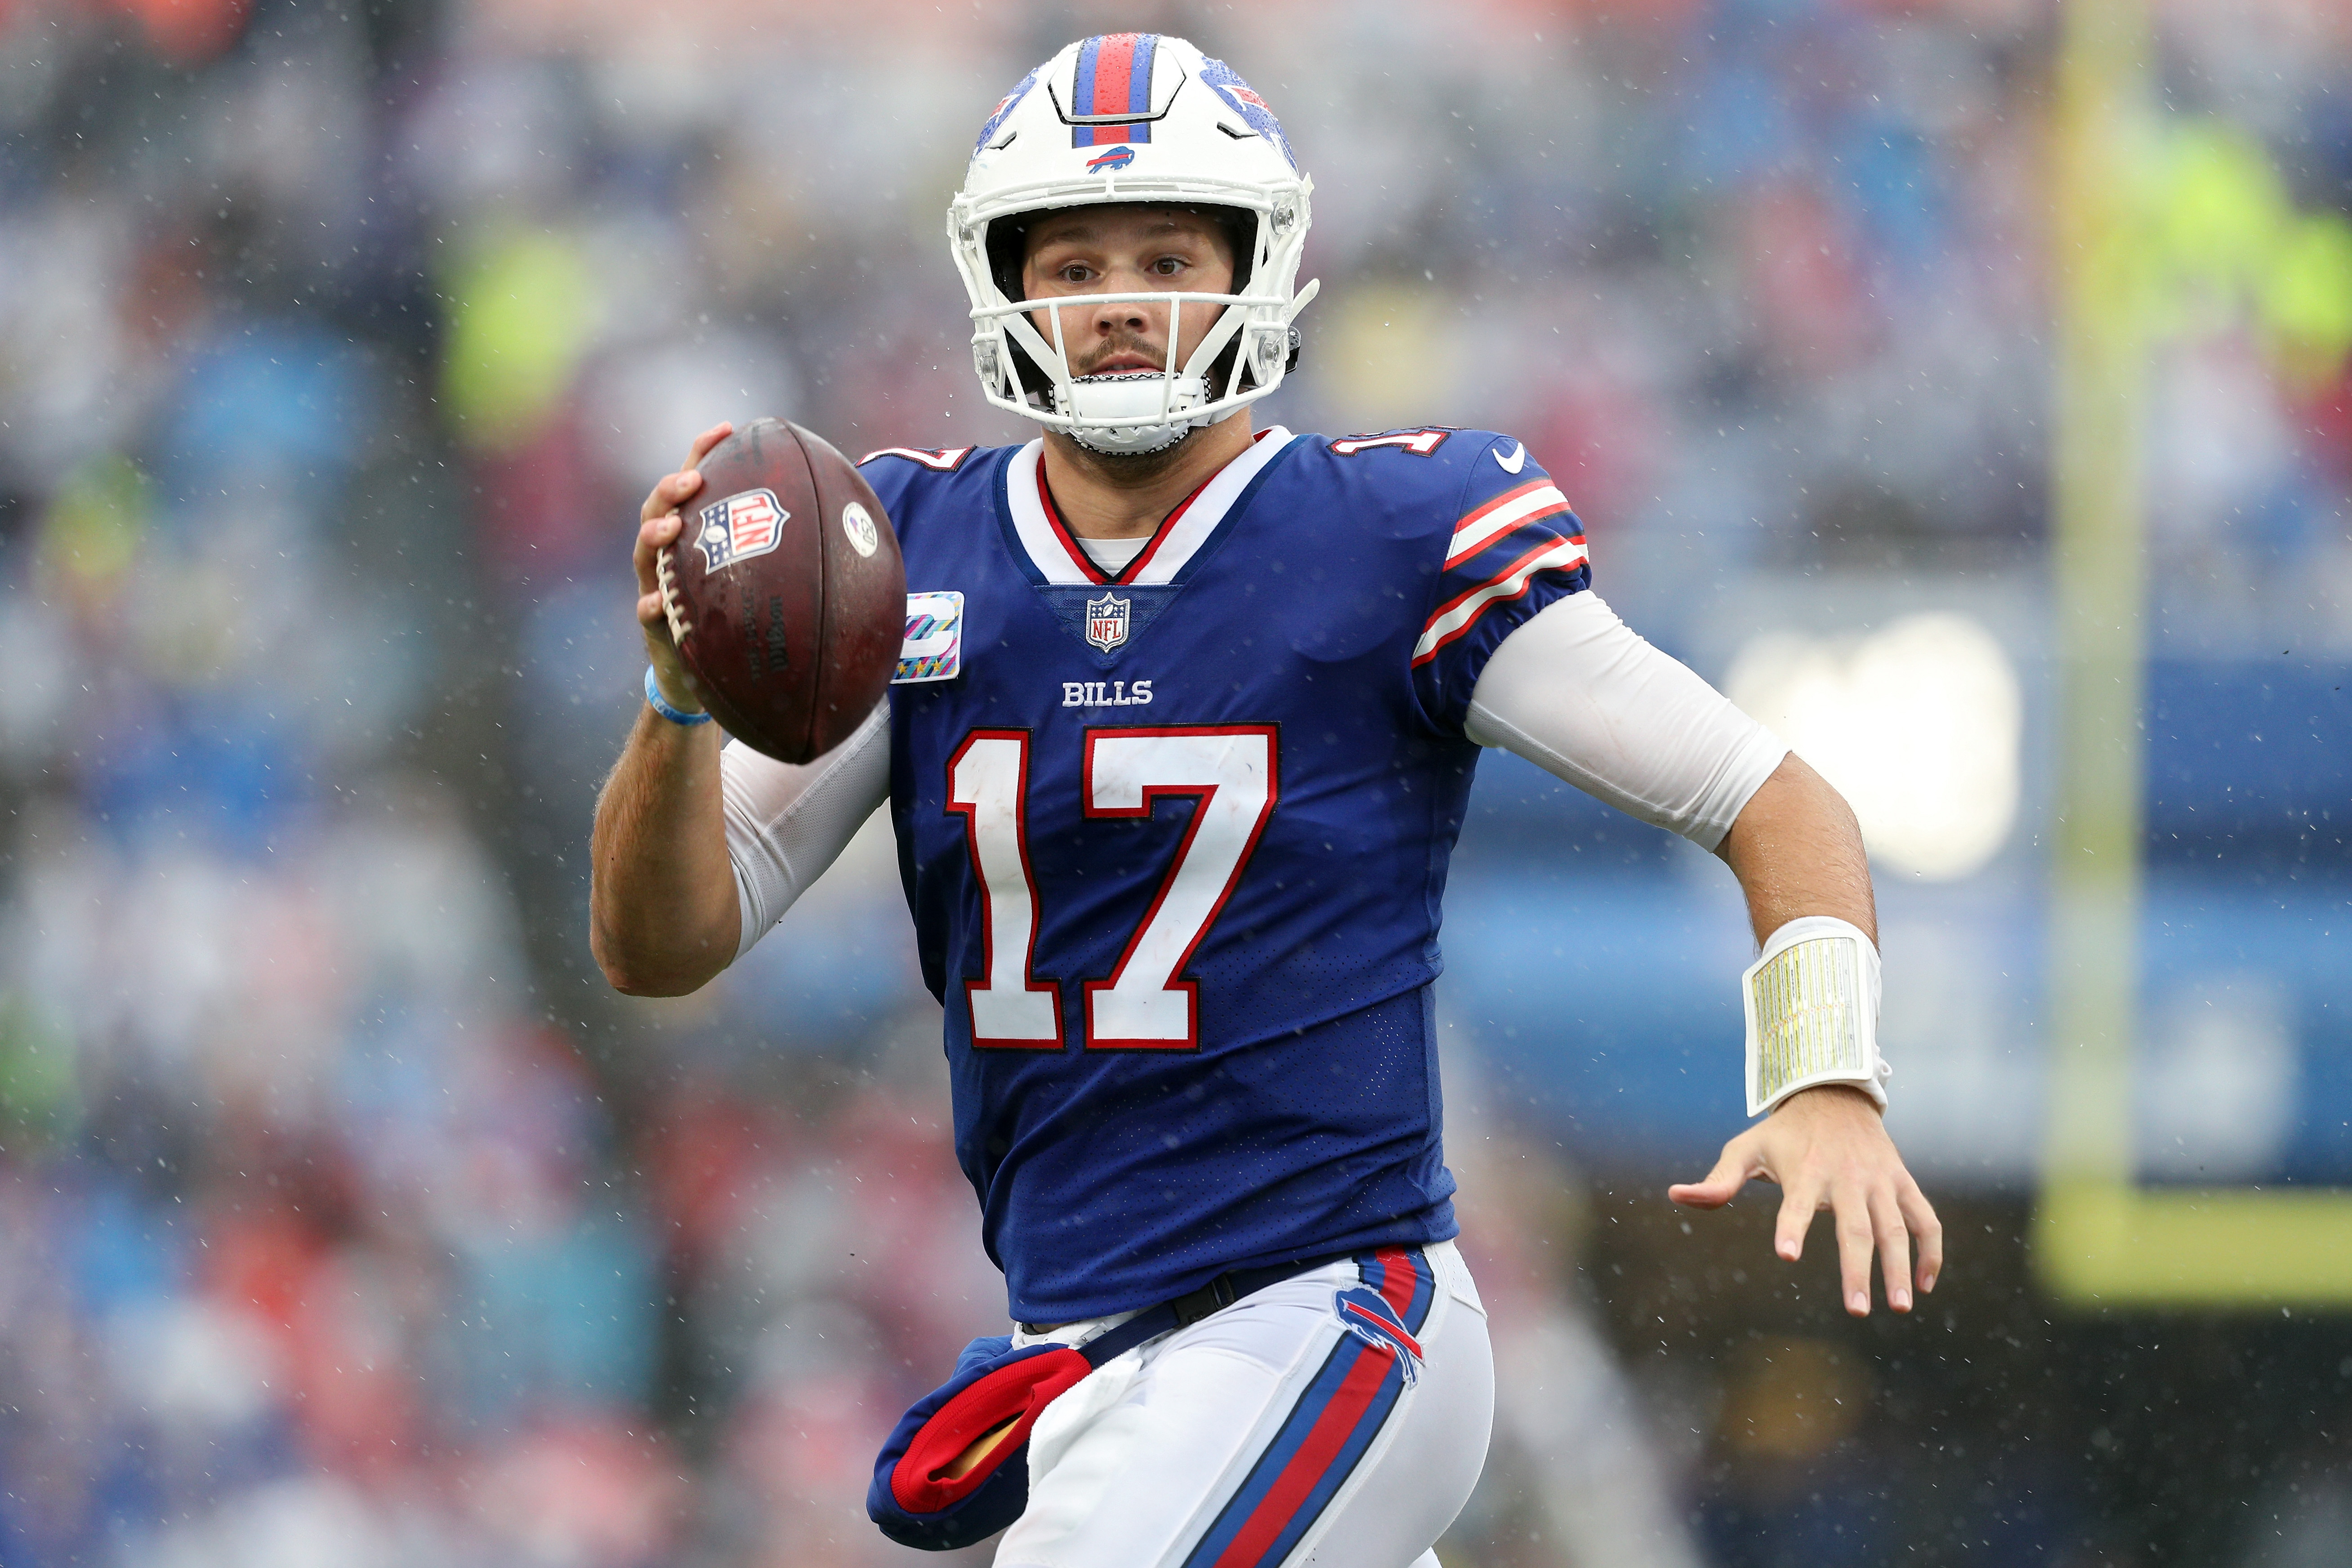 Quarterback Josh Allen #17 of the Buffalo Bills looks to pass against the Houston Texans in the fourth quarter at Highmark Stadium on October 03, 2021 in Orchard Park, New York.